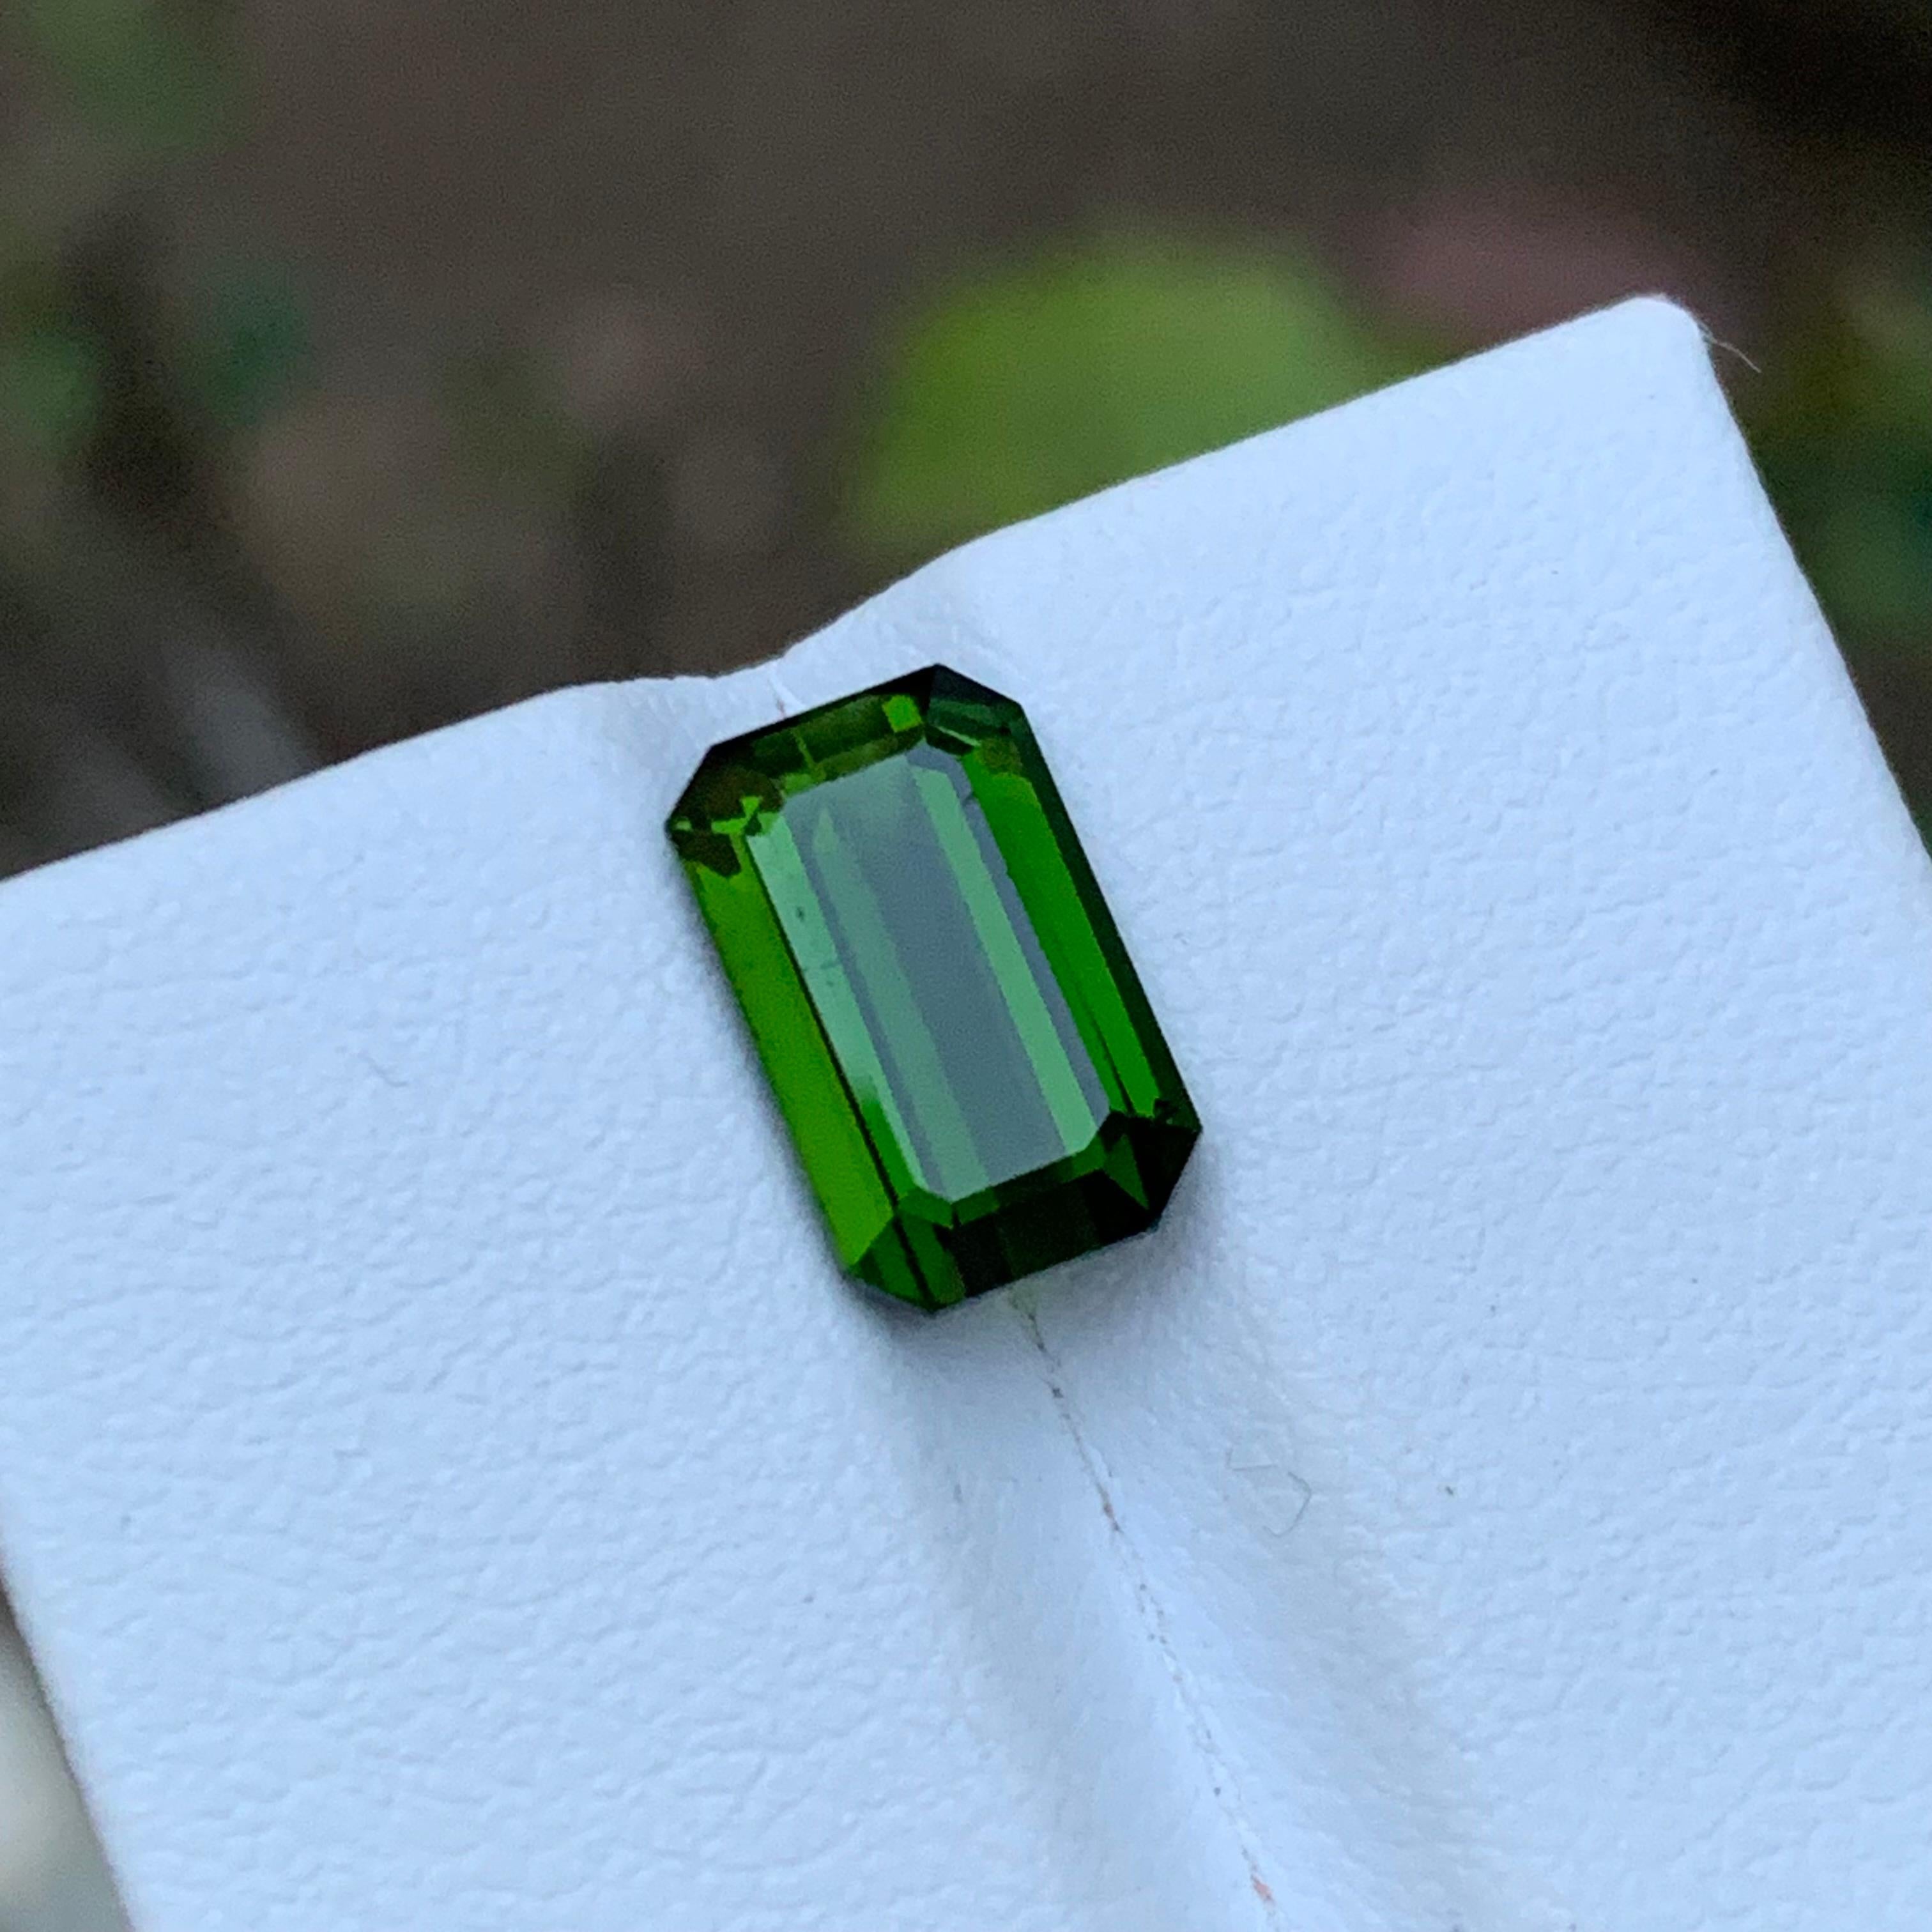 GEMSTONE TYPE: Tourmaline
PIECE(S): 1
WEIGHT: 3.35 Carats
SHAPE: Emerald
SIZE (MM): 10.79 x 6.79 x 4.82
COLOR: Vivid Green
CLARITY: Slightly Included
TREATMENT: None
ORIGIN: Afghanistan
CERTIFICATE: On demand

Truly exquisite 3.35 Carat Vivid Green